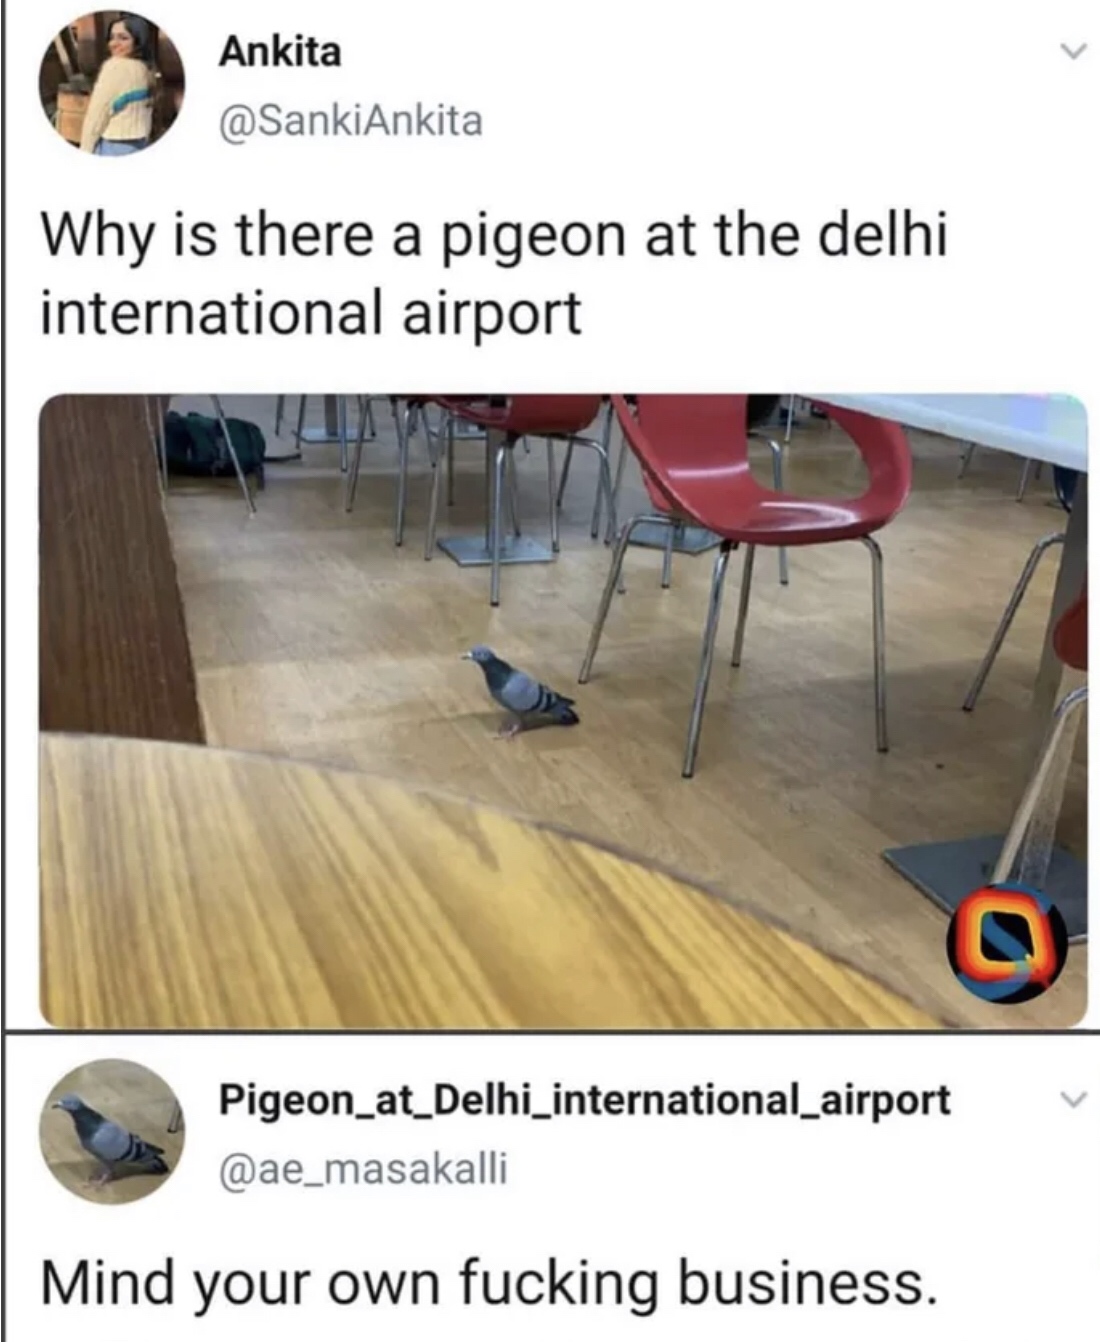 floor - Ankita Why is there a pigeon at the delhi international airport Pigeon_at_Delhi_international_airport Mind your own fucking business.